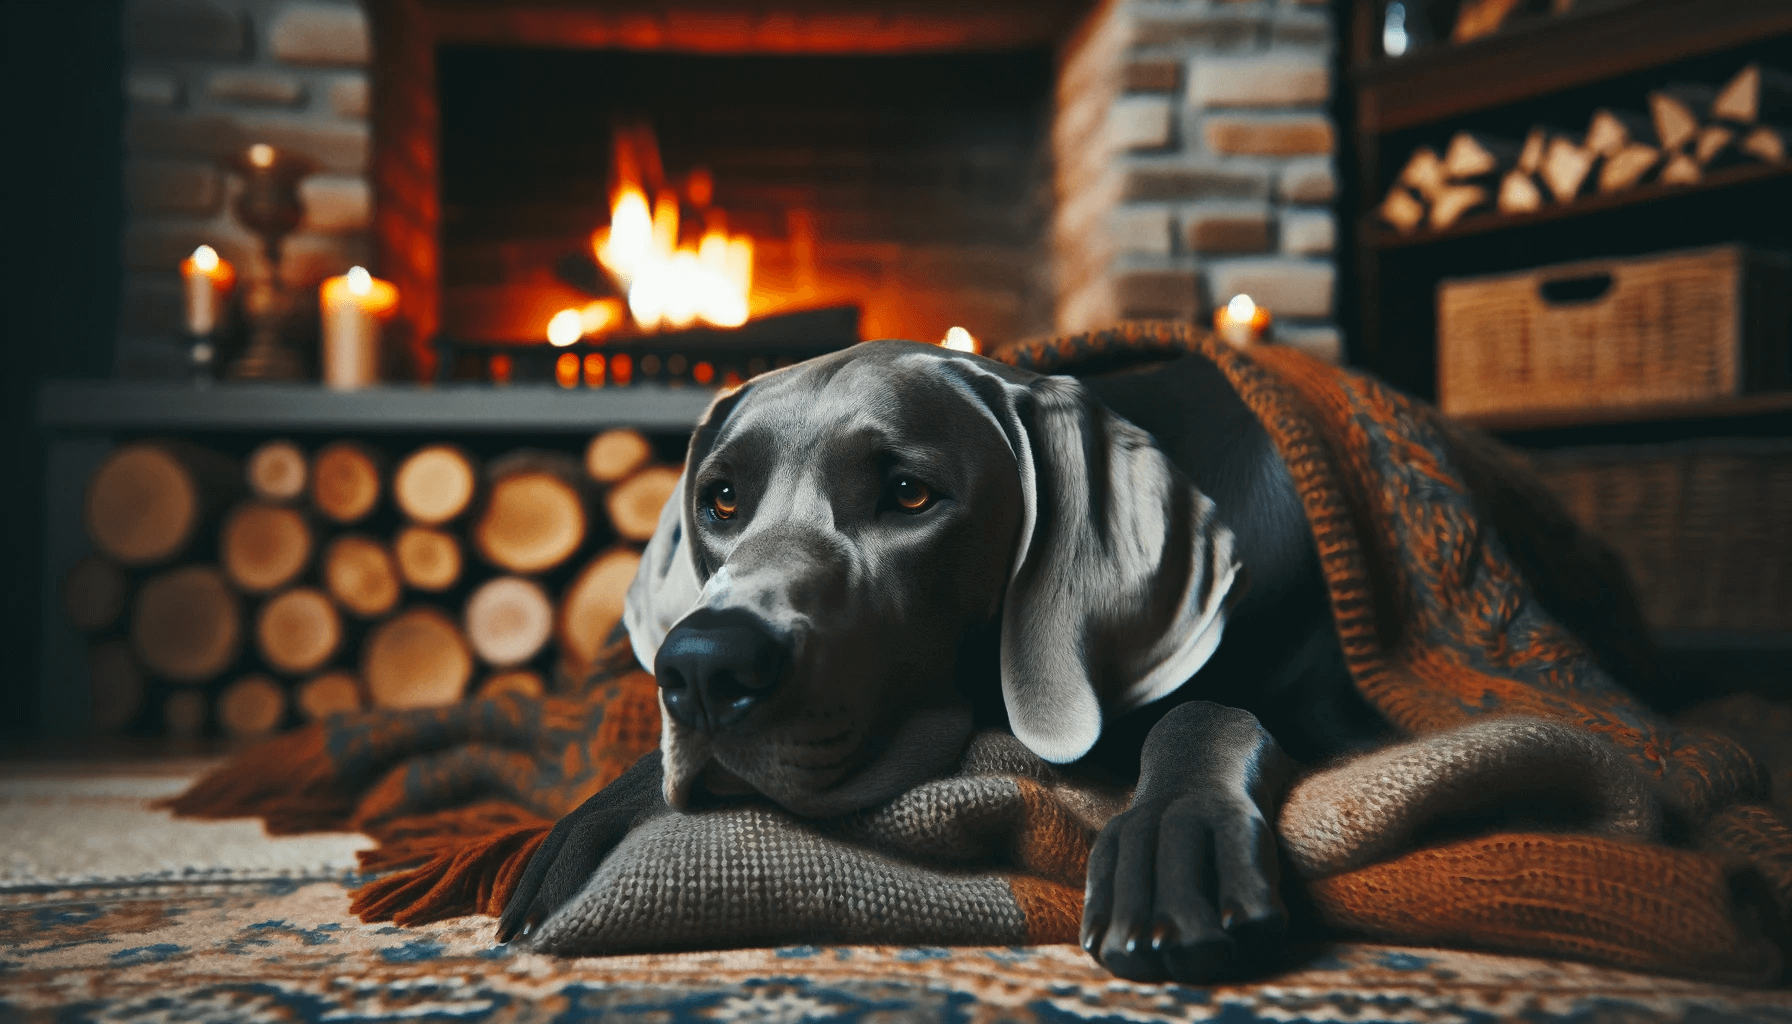 Greyador_s_peaceful_moments_resting_by_the_fireplace_creating_a_serene_and_cozy_atmosphere_in_the_scene